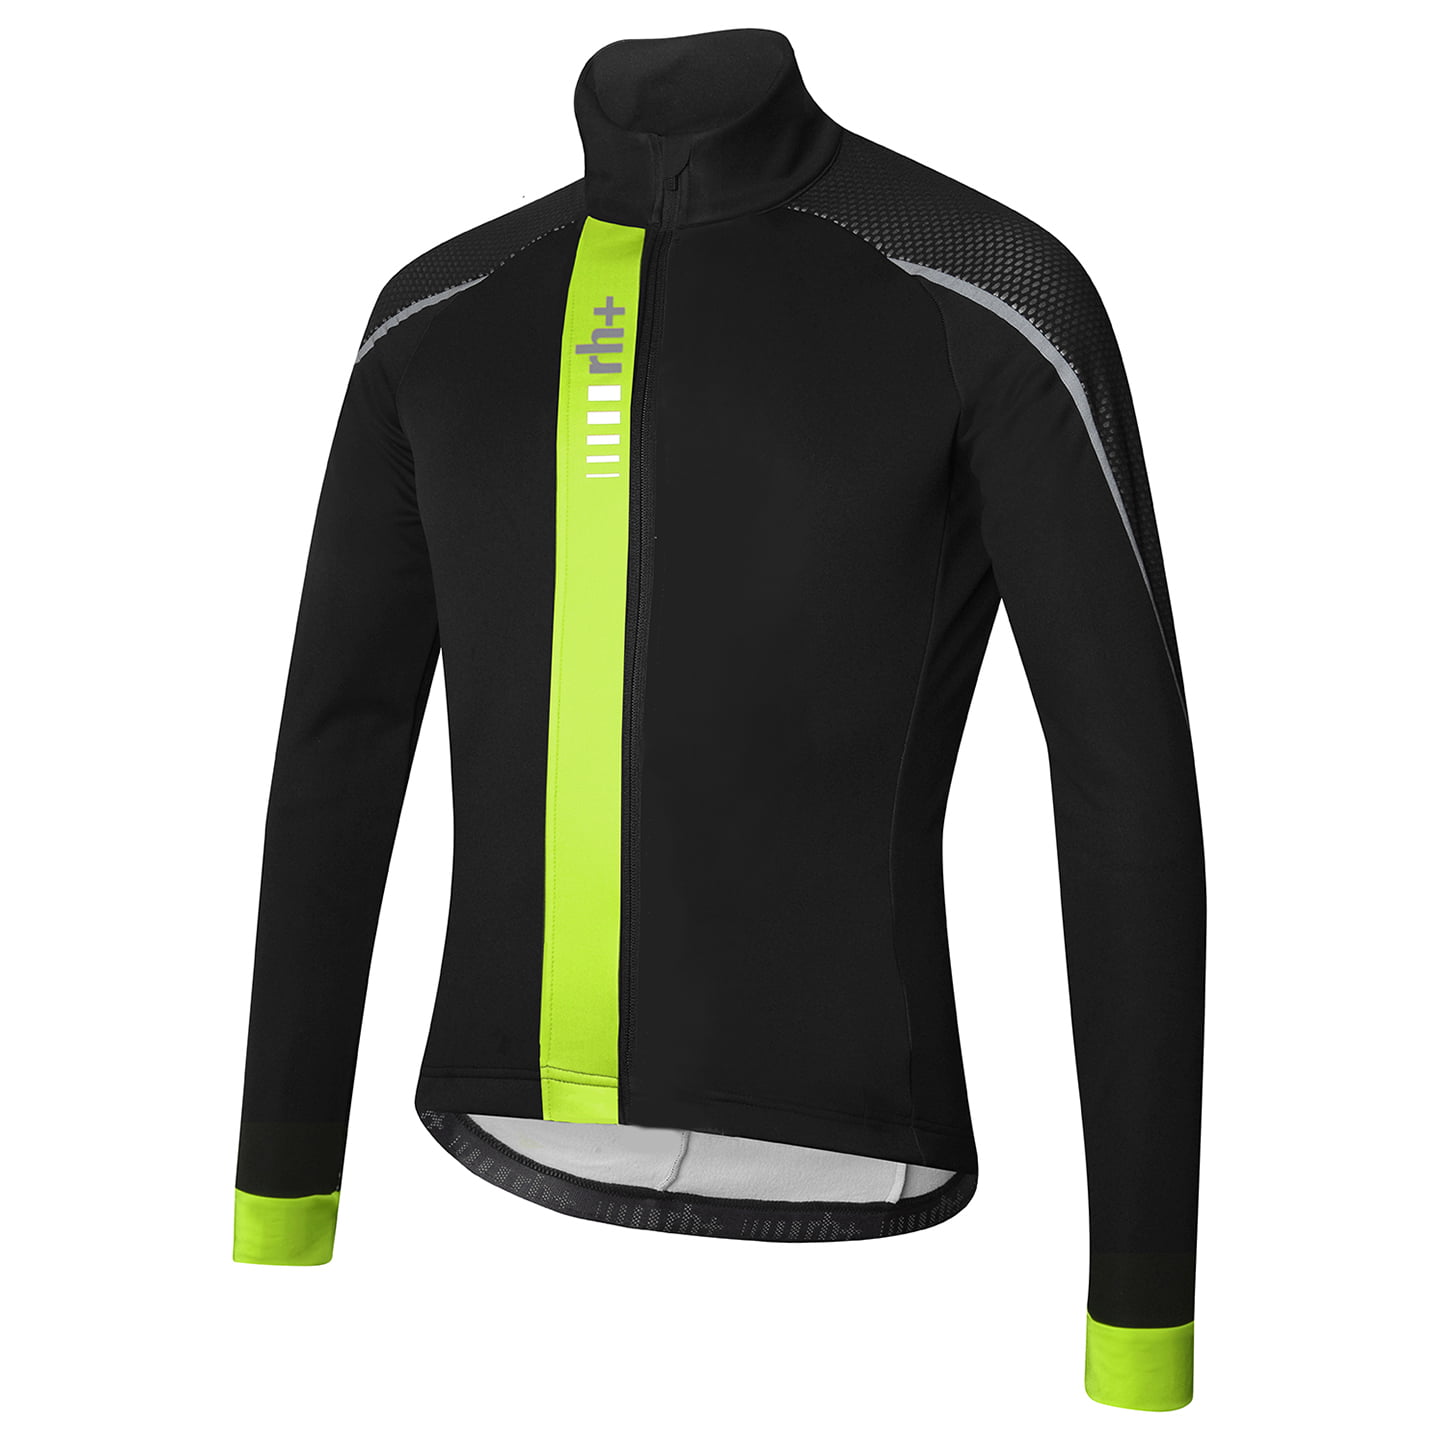 RH+ Code II Winter Jacket, for men, size M, Cycle jacket, Cycling clothing